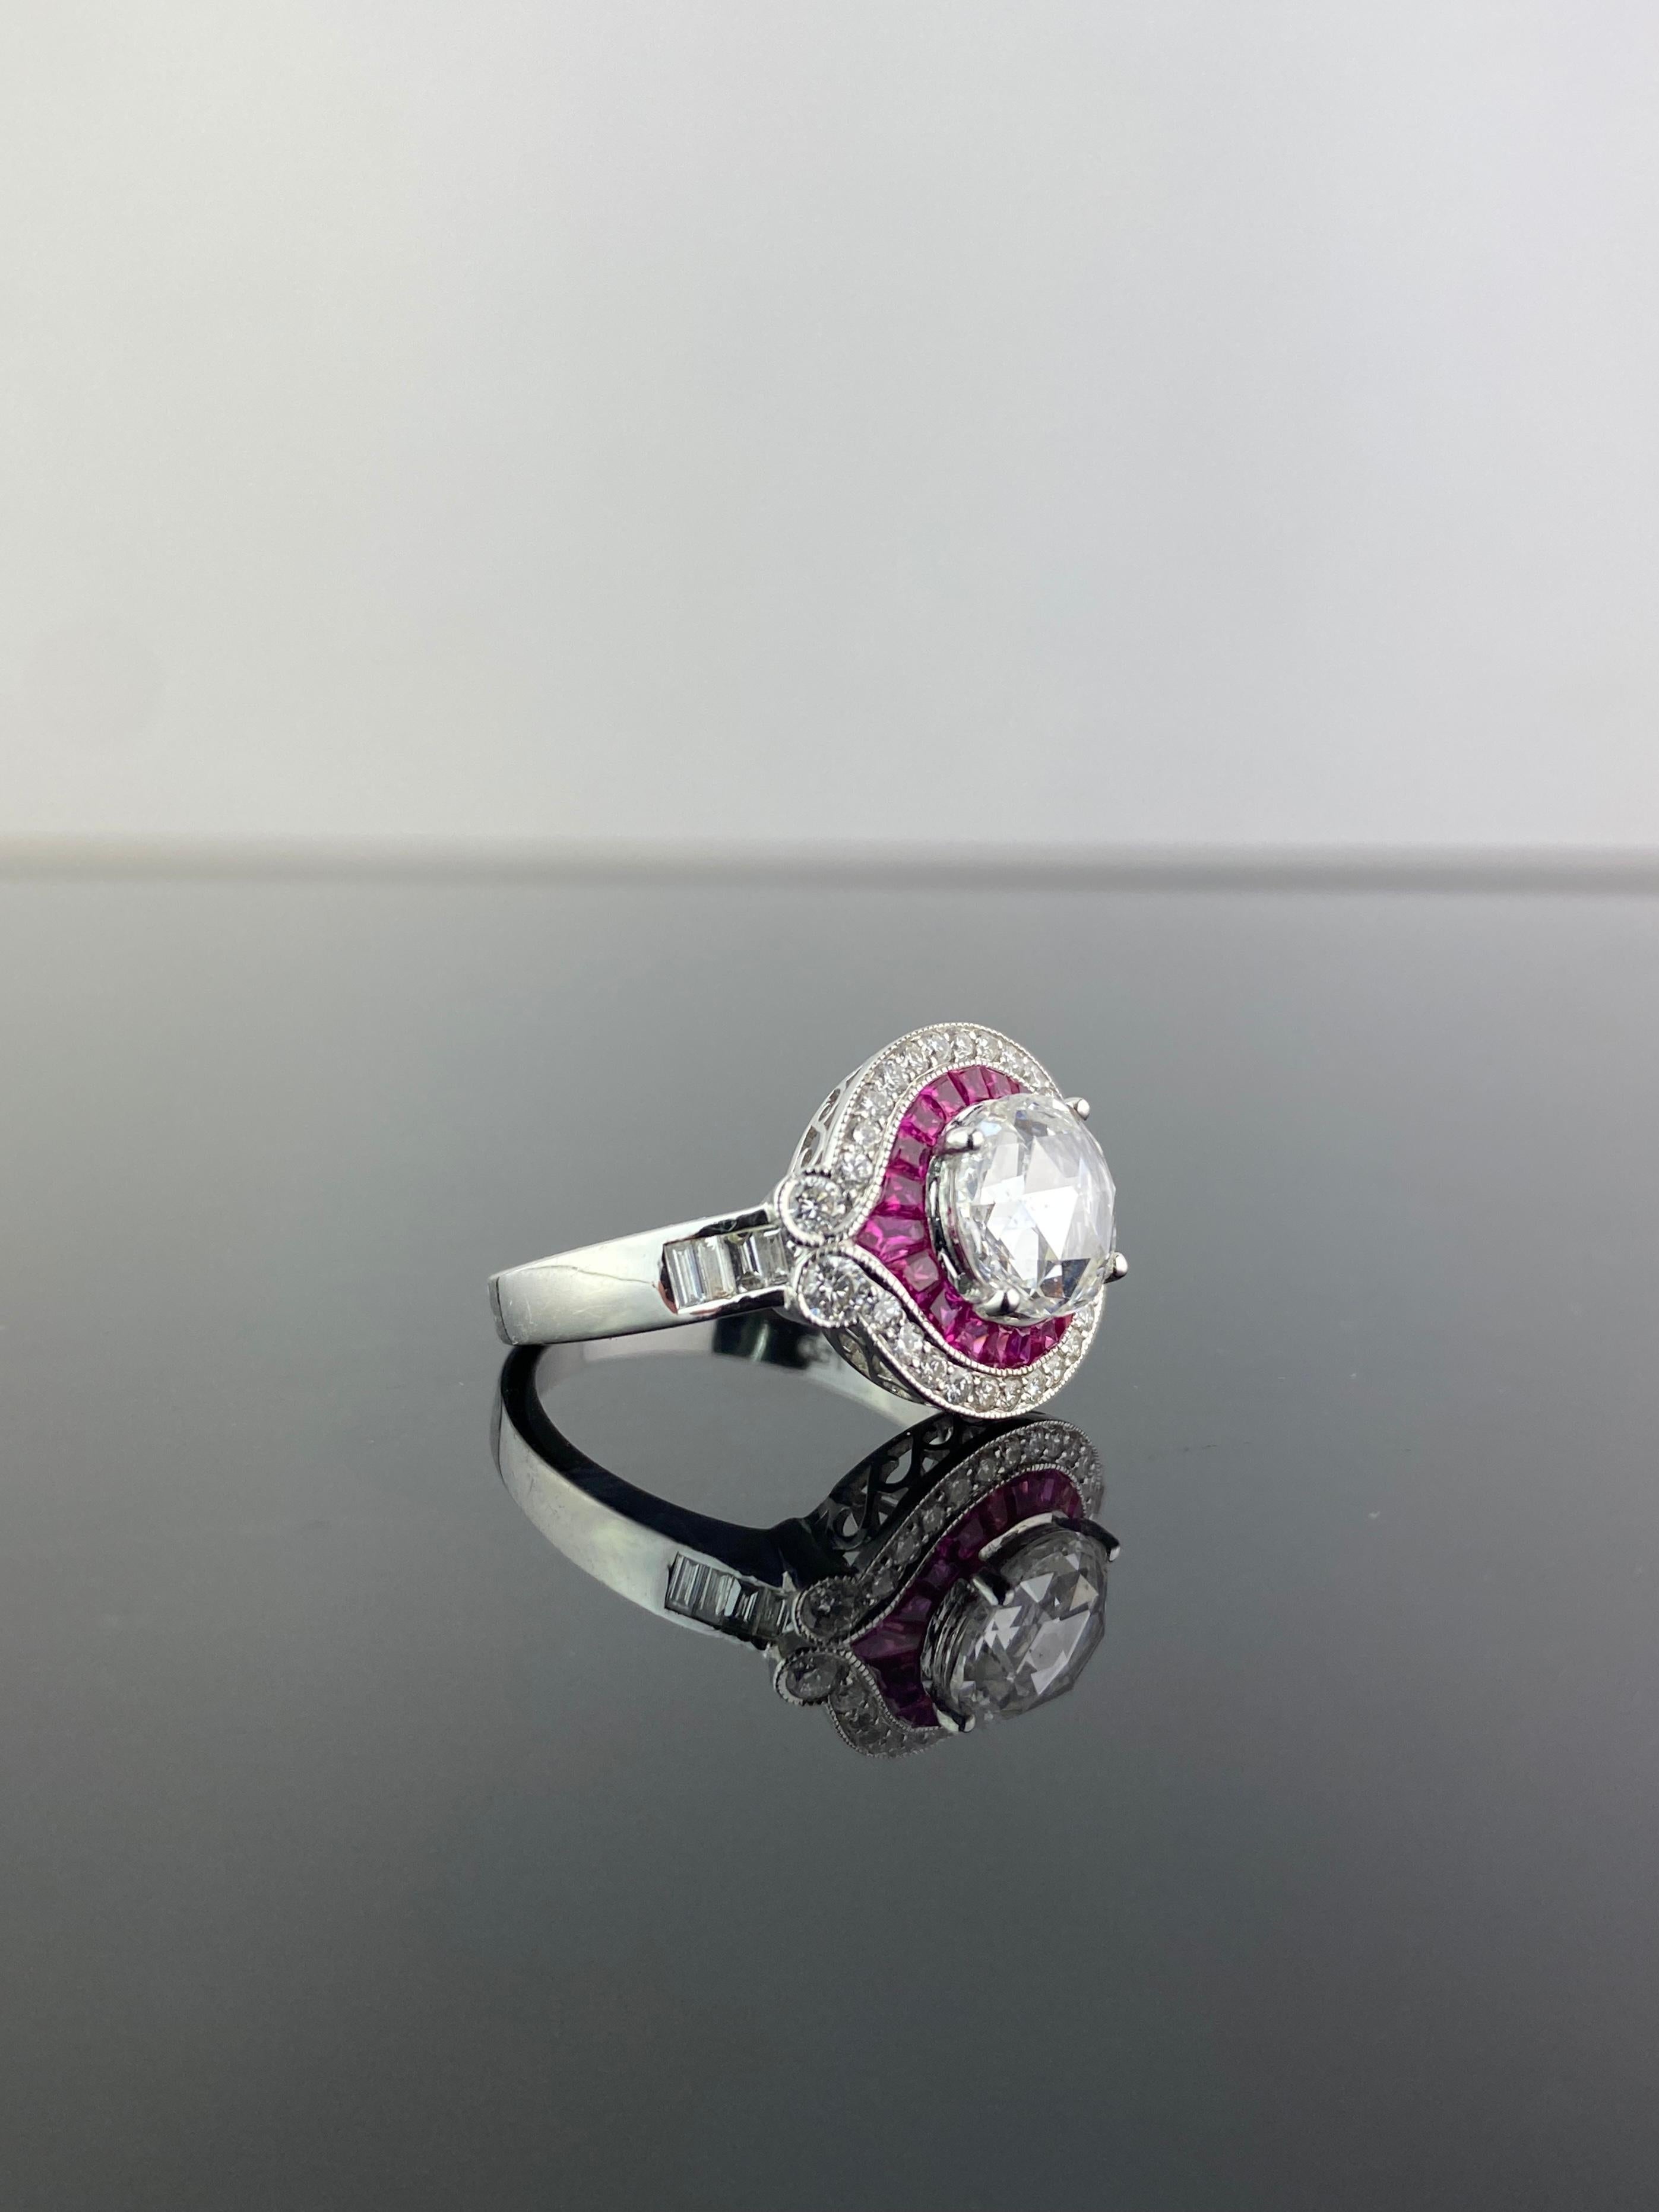 A very unique, art-deco looking 1.32 carat round rose-cut Diamond and Ruby solitaire engagement ring. The rubies are cut precisely to fit in the mounting, giving it an impeccable overall look. A total of 0.48 White Diamonds and 0.75 carat Rubies are